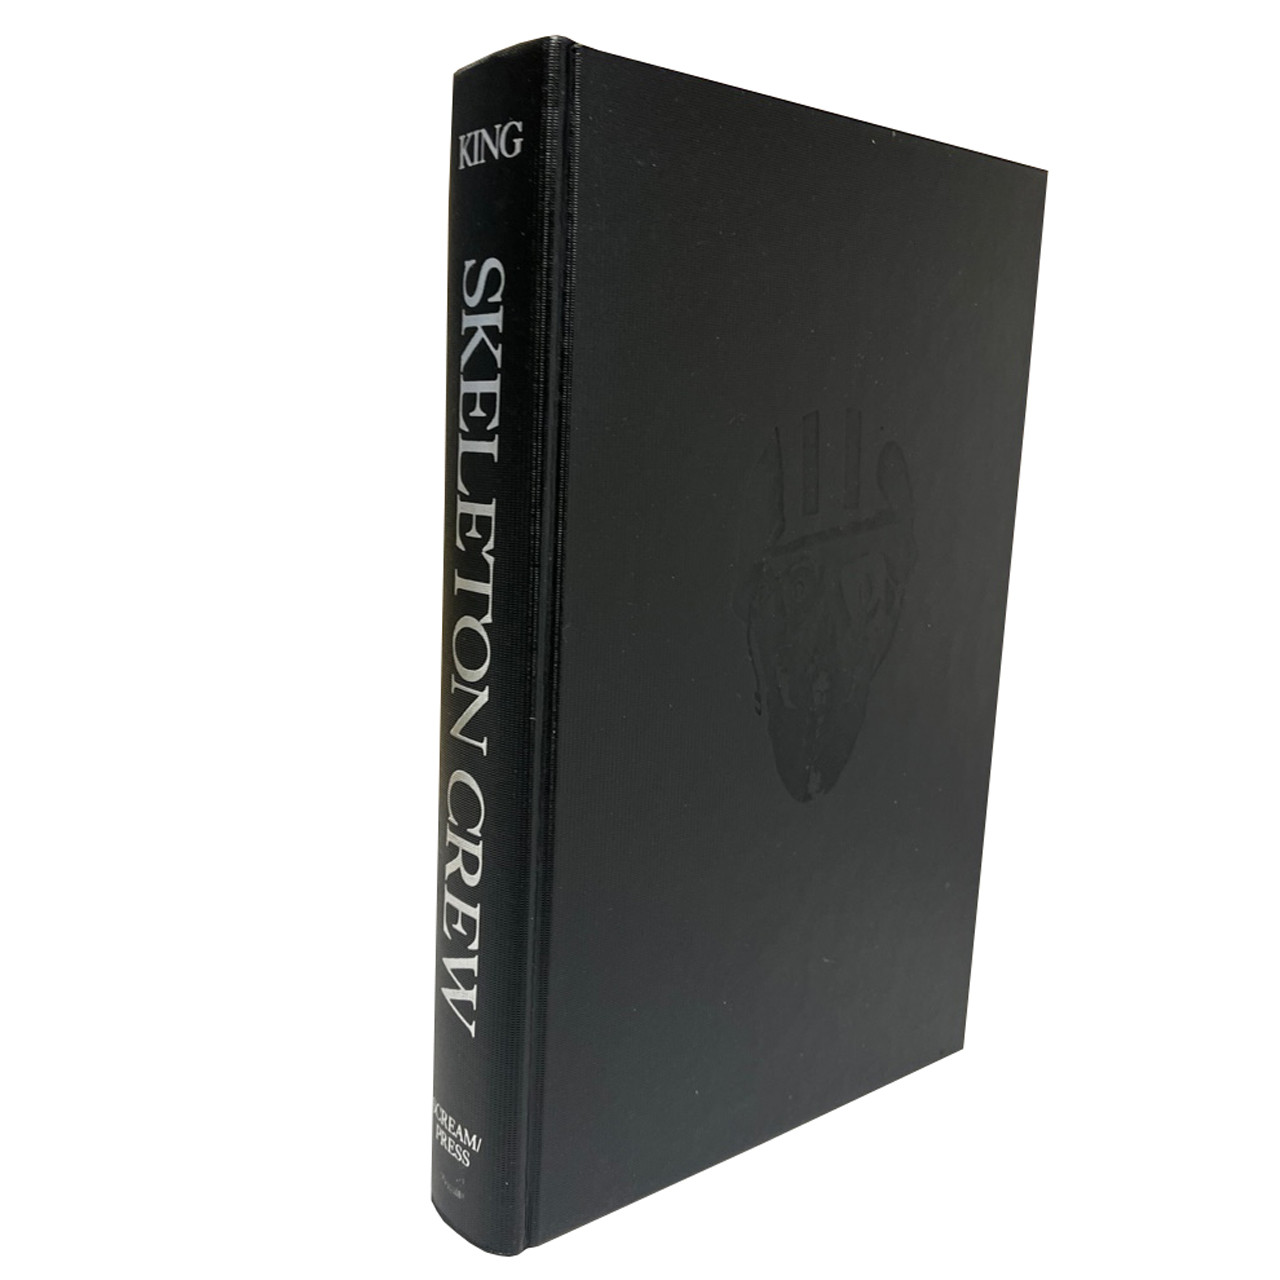 Stephen King "Skeleton Crew" Slipcased Signed Deluxe Limited First Edition No. 308 of 1,000 w/Color Poster [Very Fine]